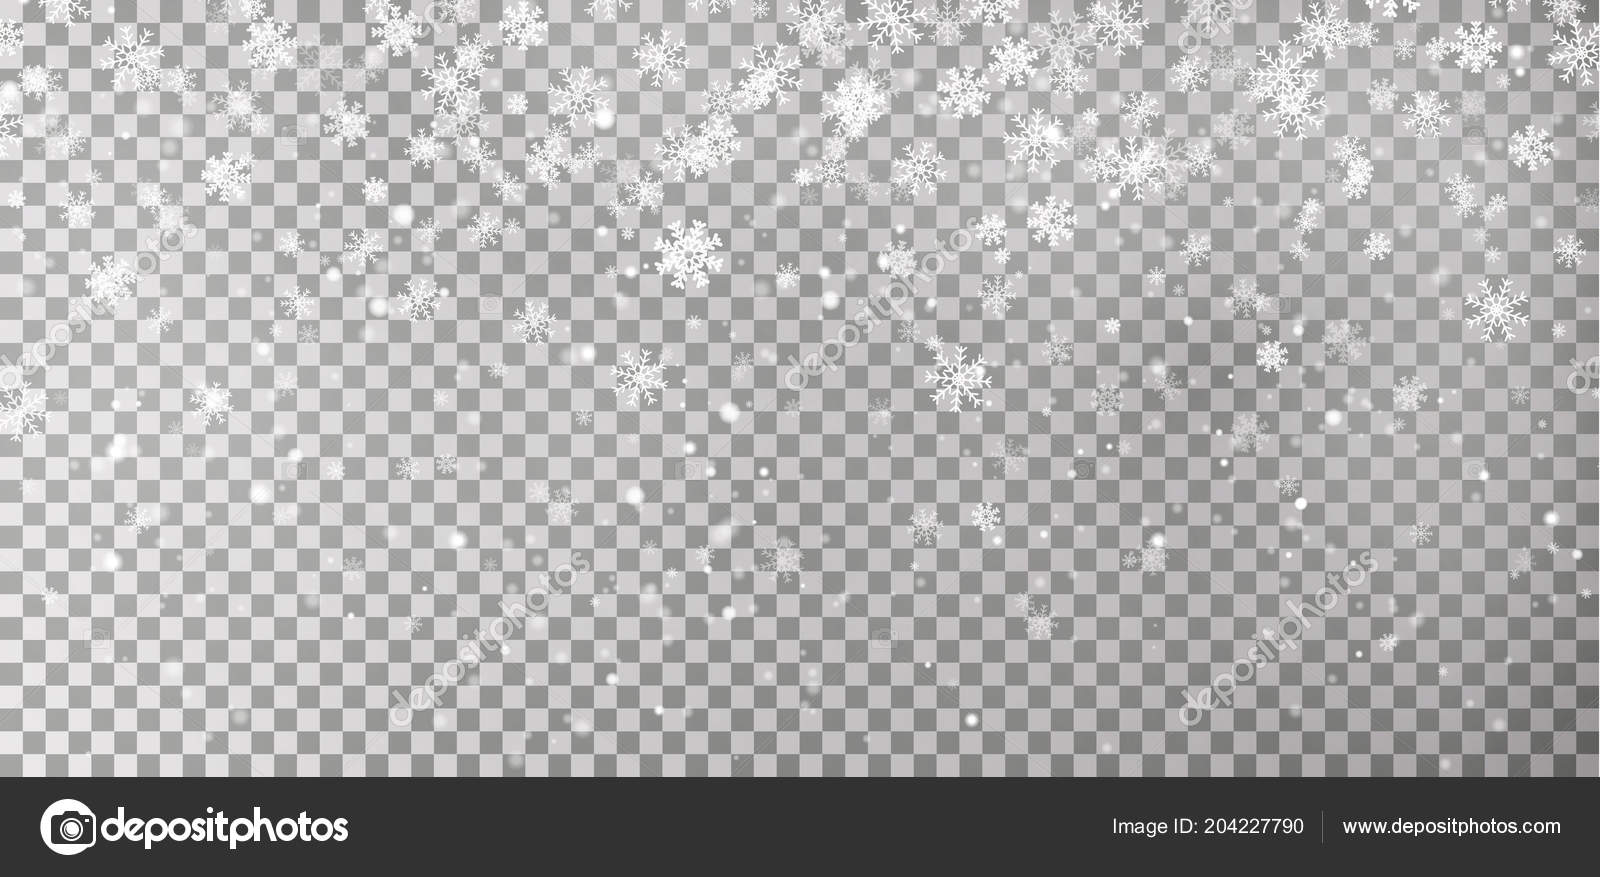 Snow Flakes Snowflake Abstract Light And Shadow Flake Winter